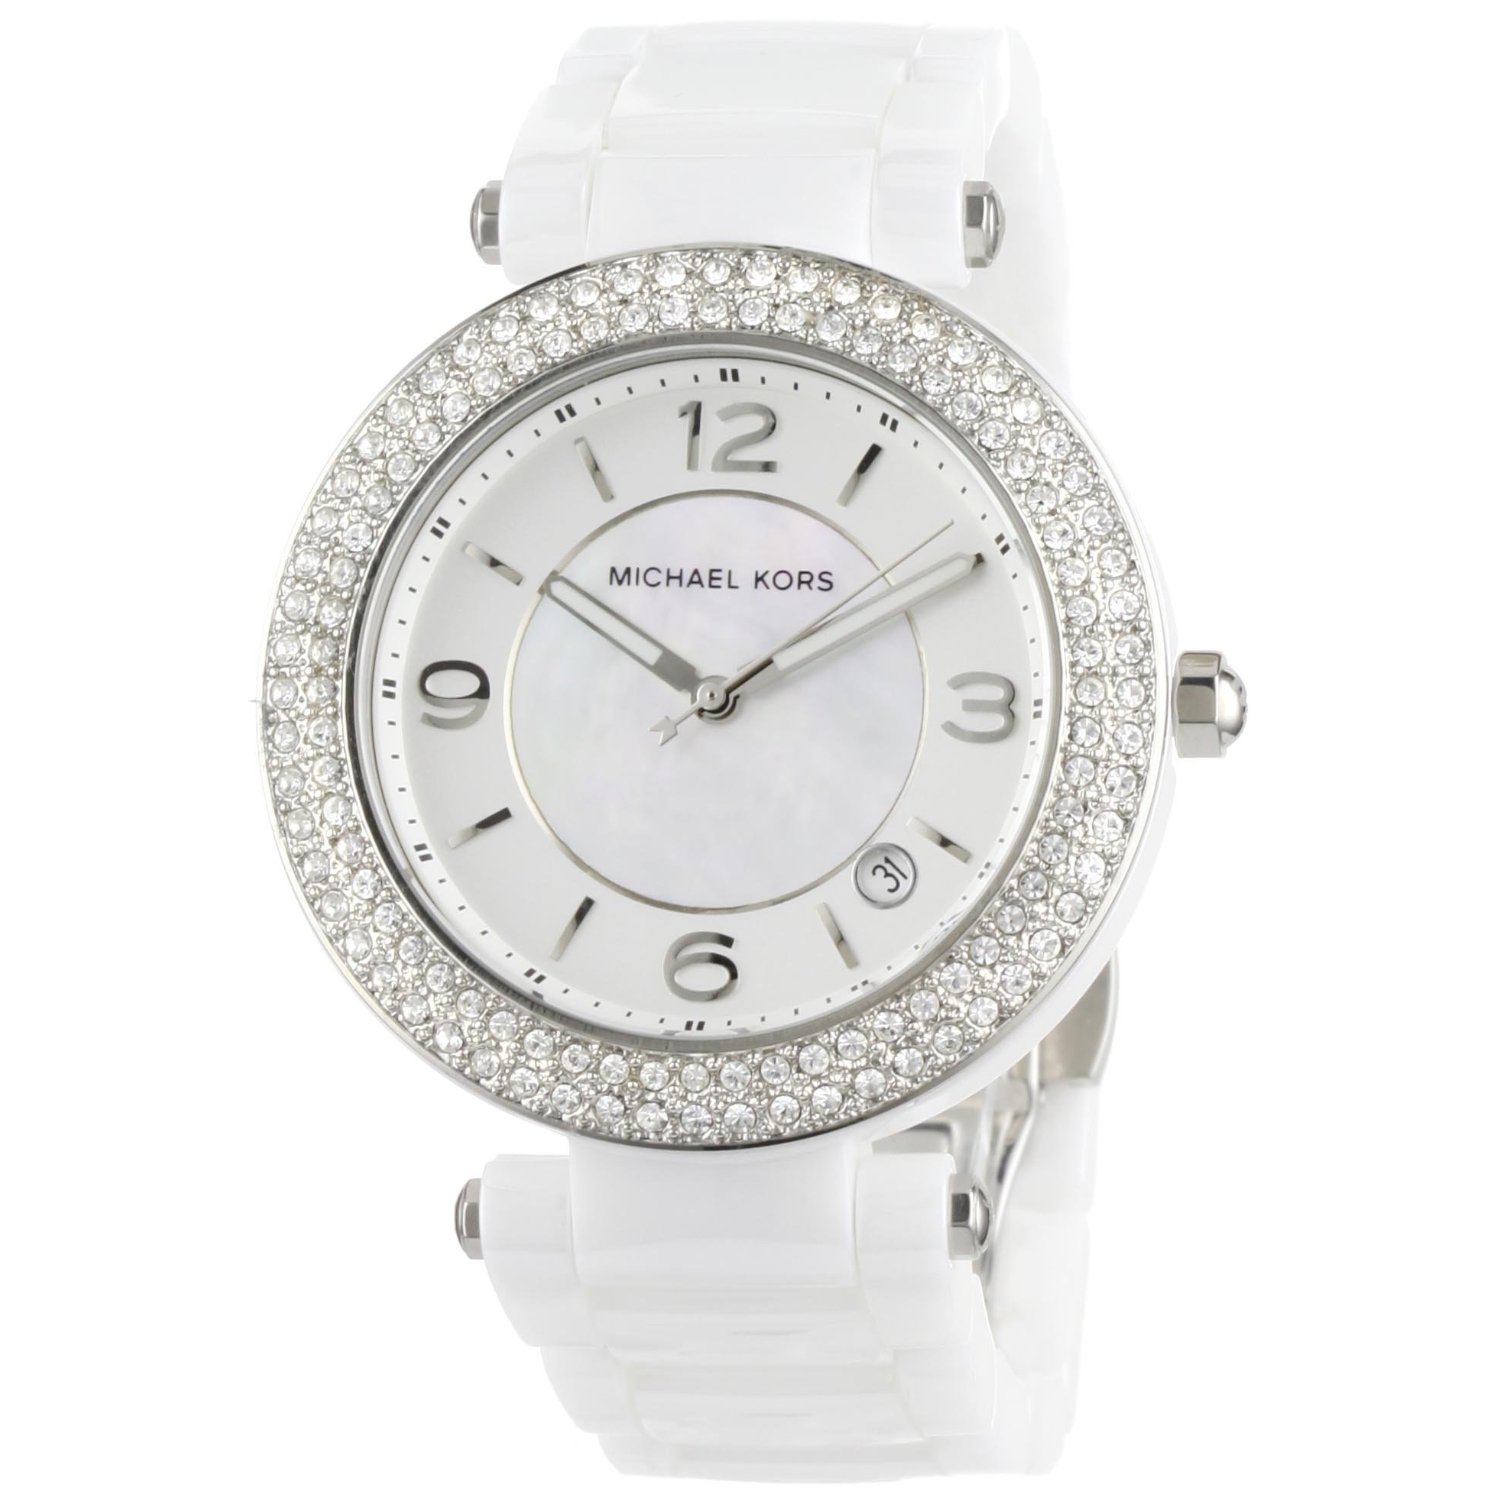 White Ceramic Watches for Women - It's Chanel All The Way!